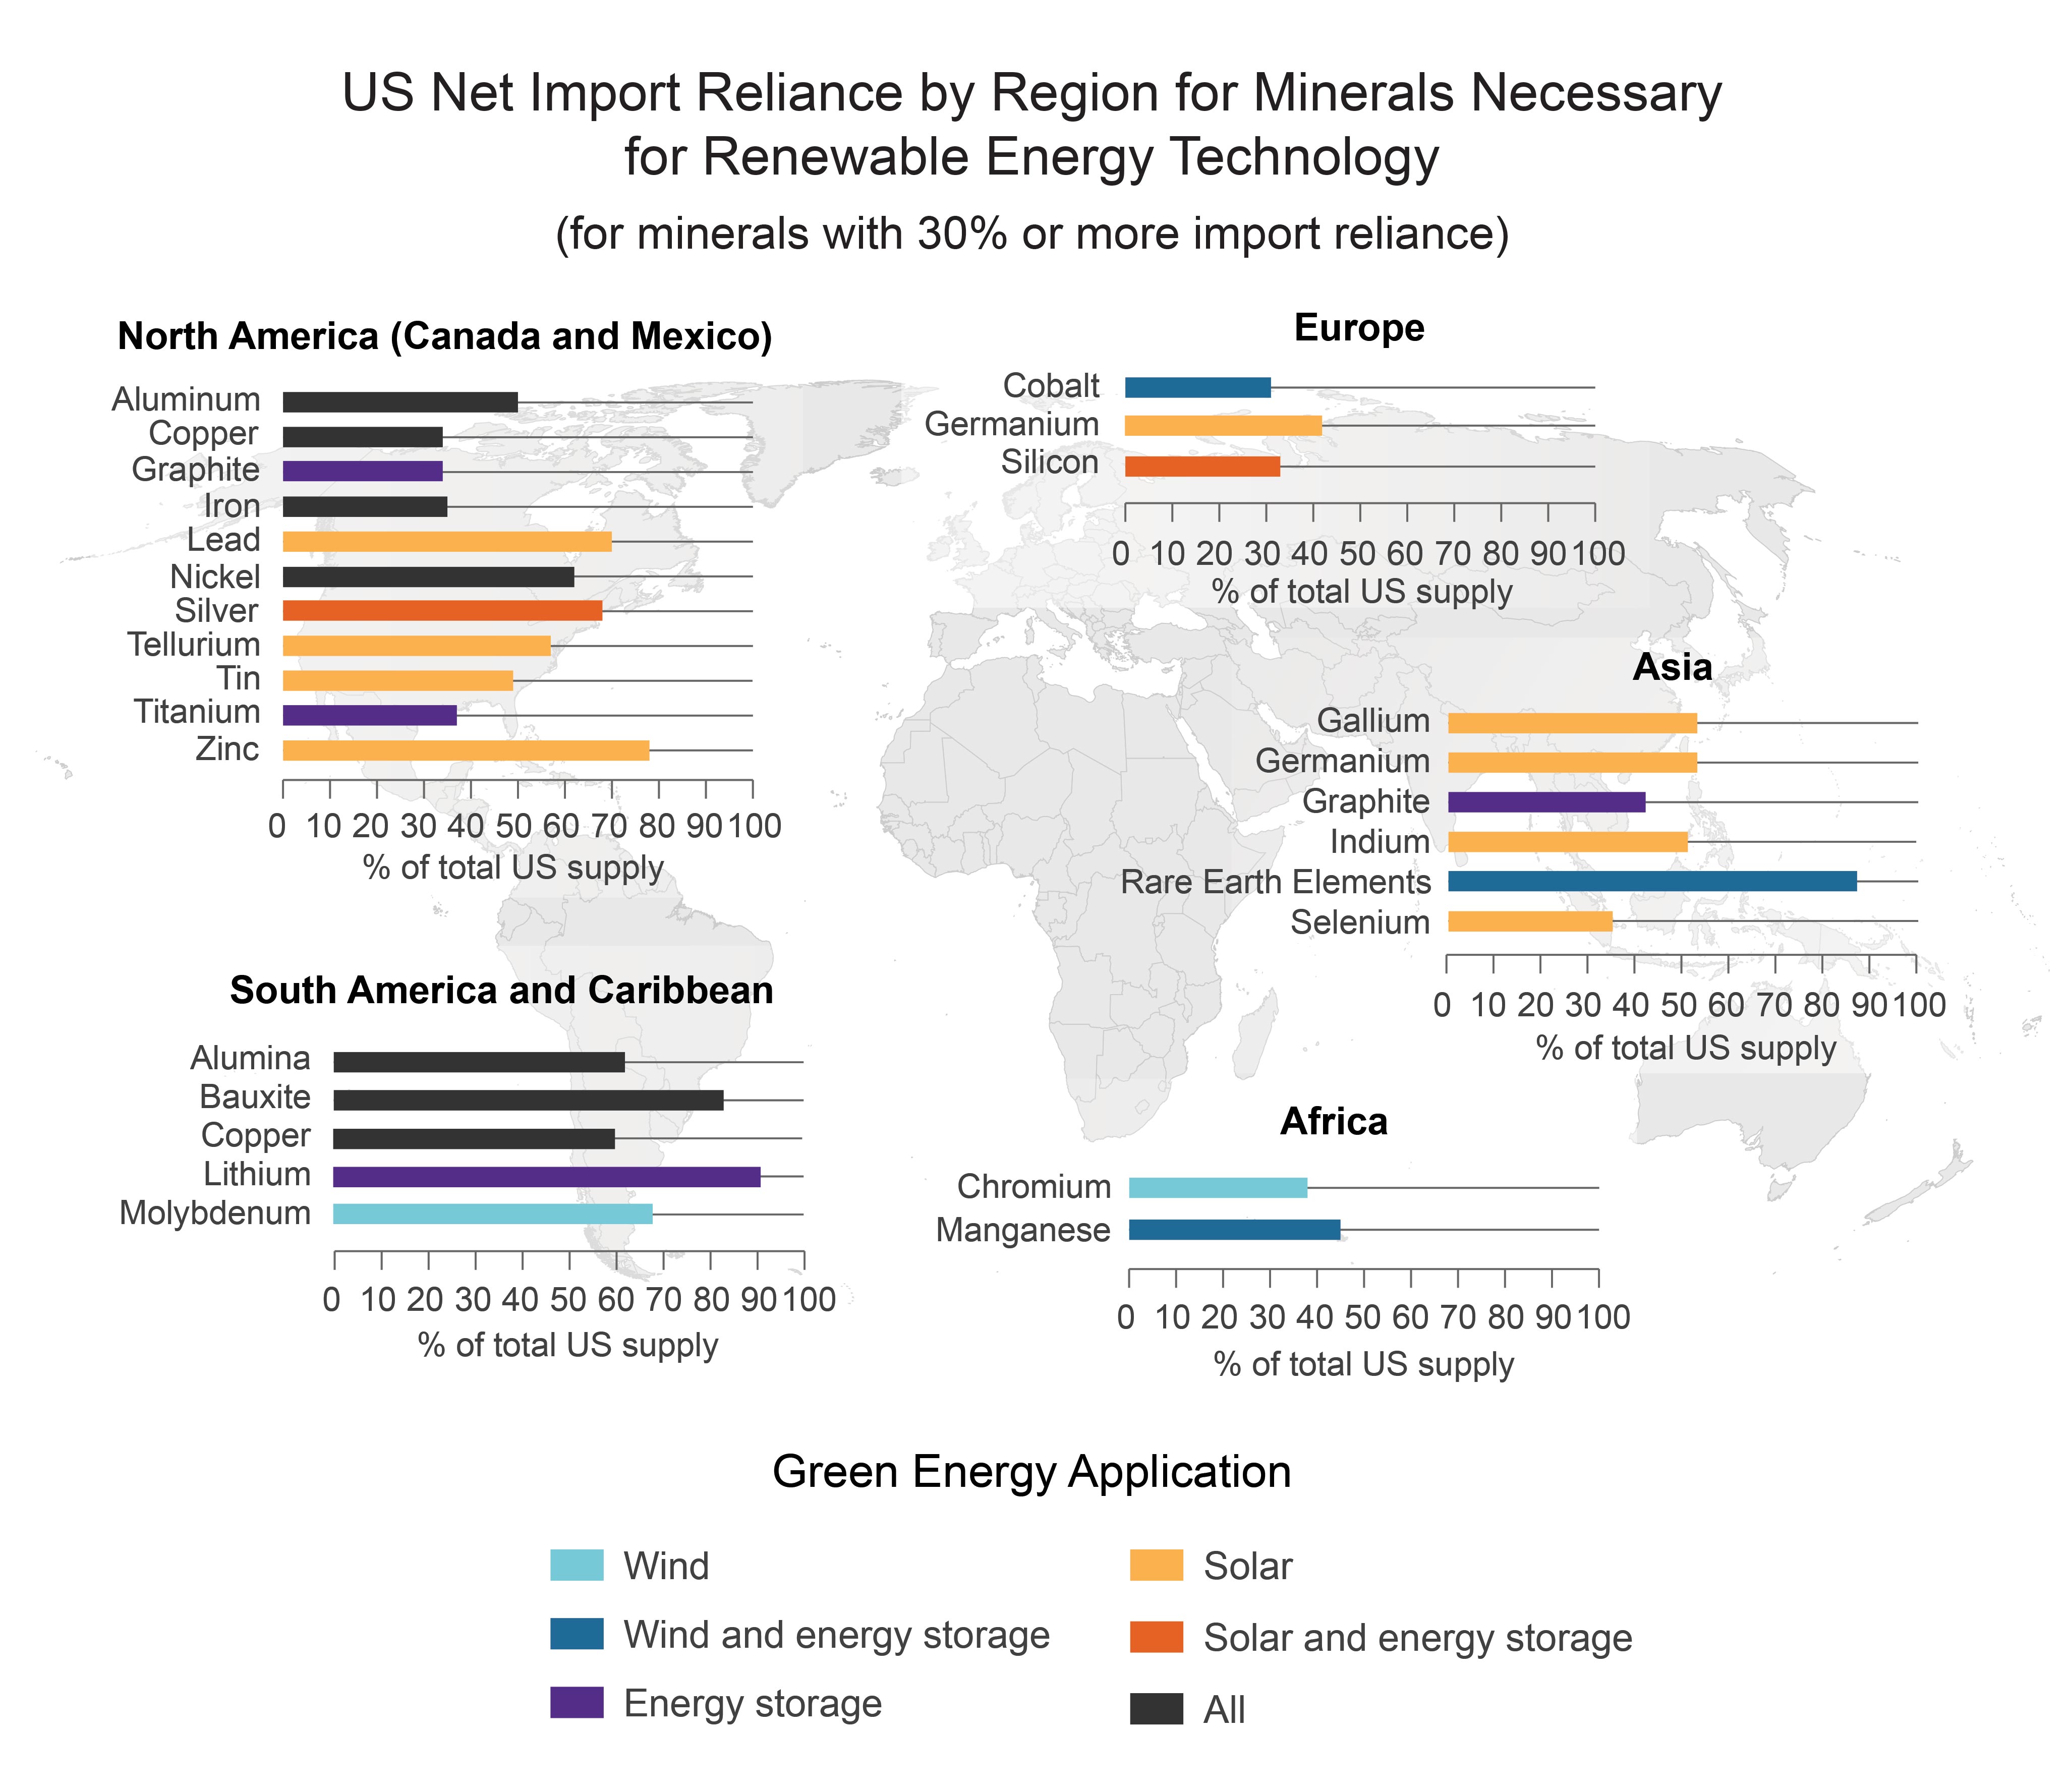 US Net Import Reliance by Region for Minerals Necessary for Renewable Energy Technology